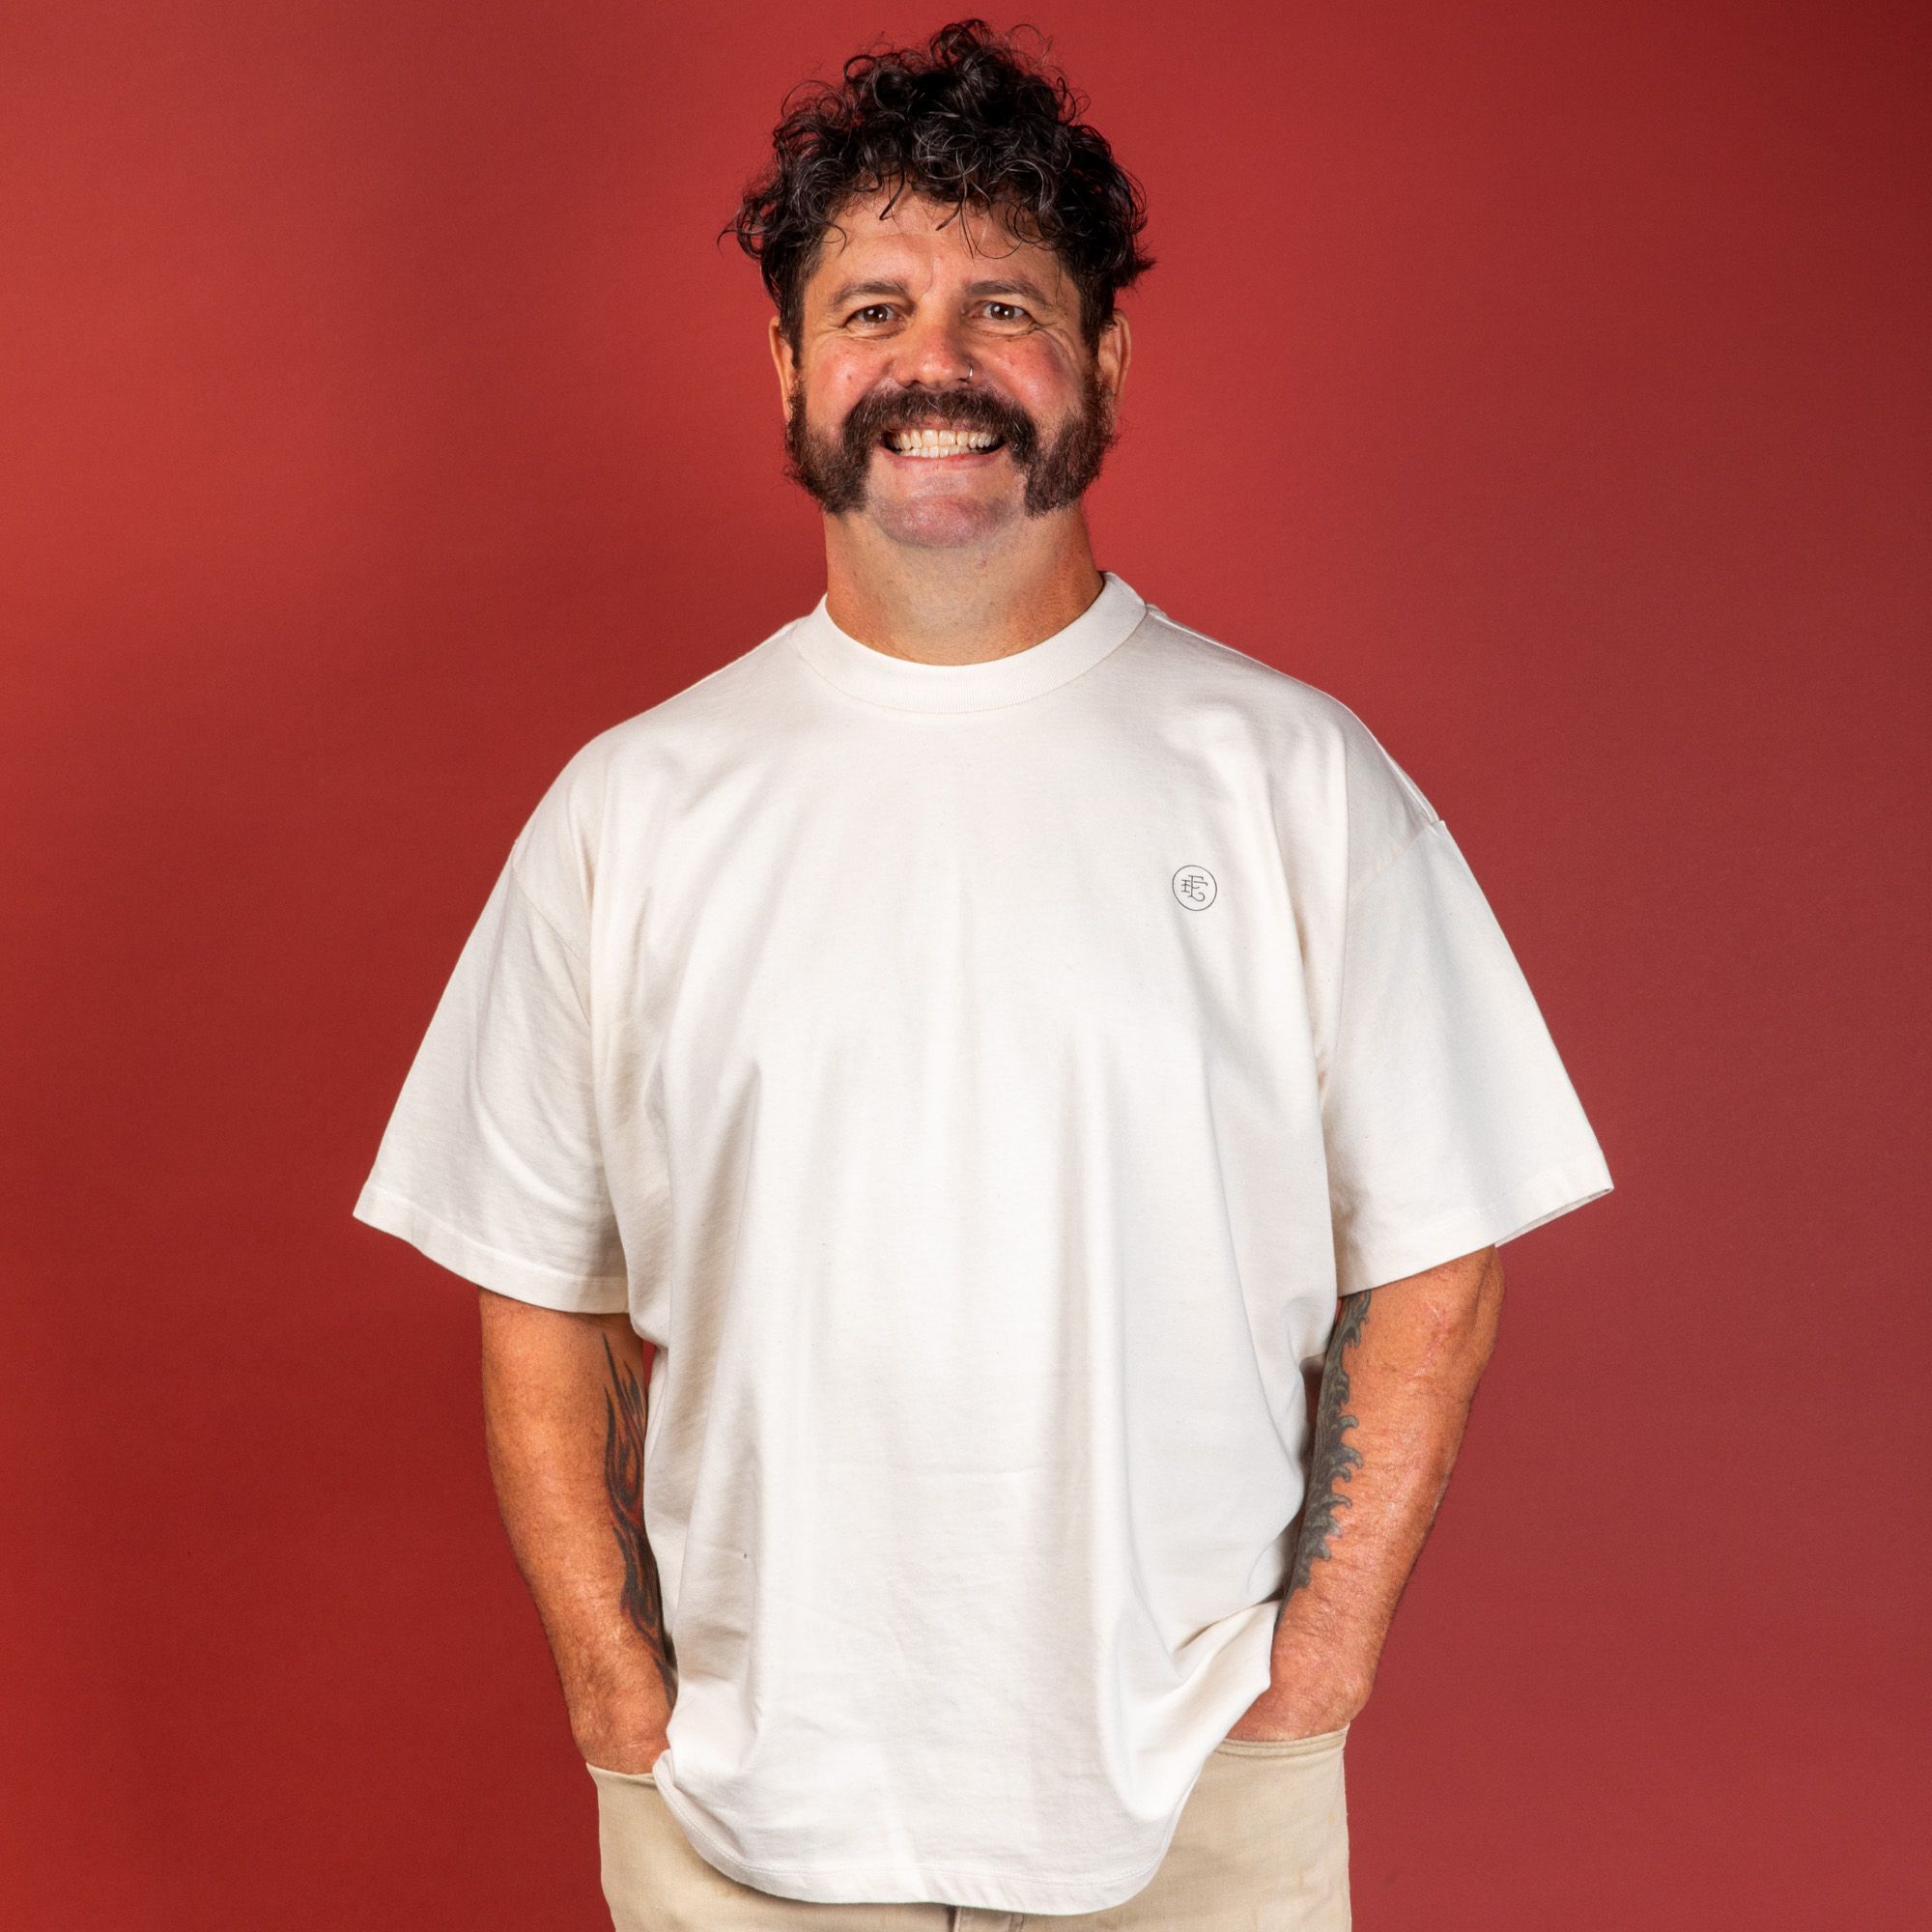 Model wearing the t-shirt and smiling at the camera with hands in front pockets.